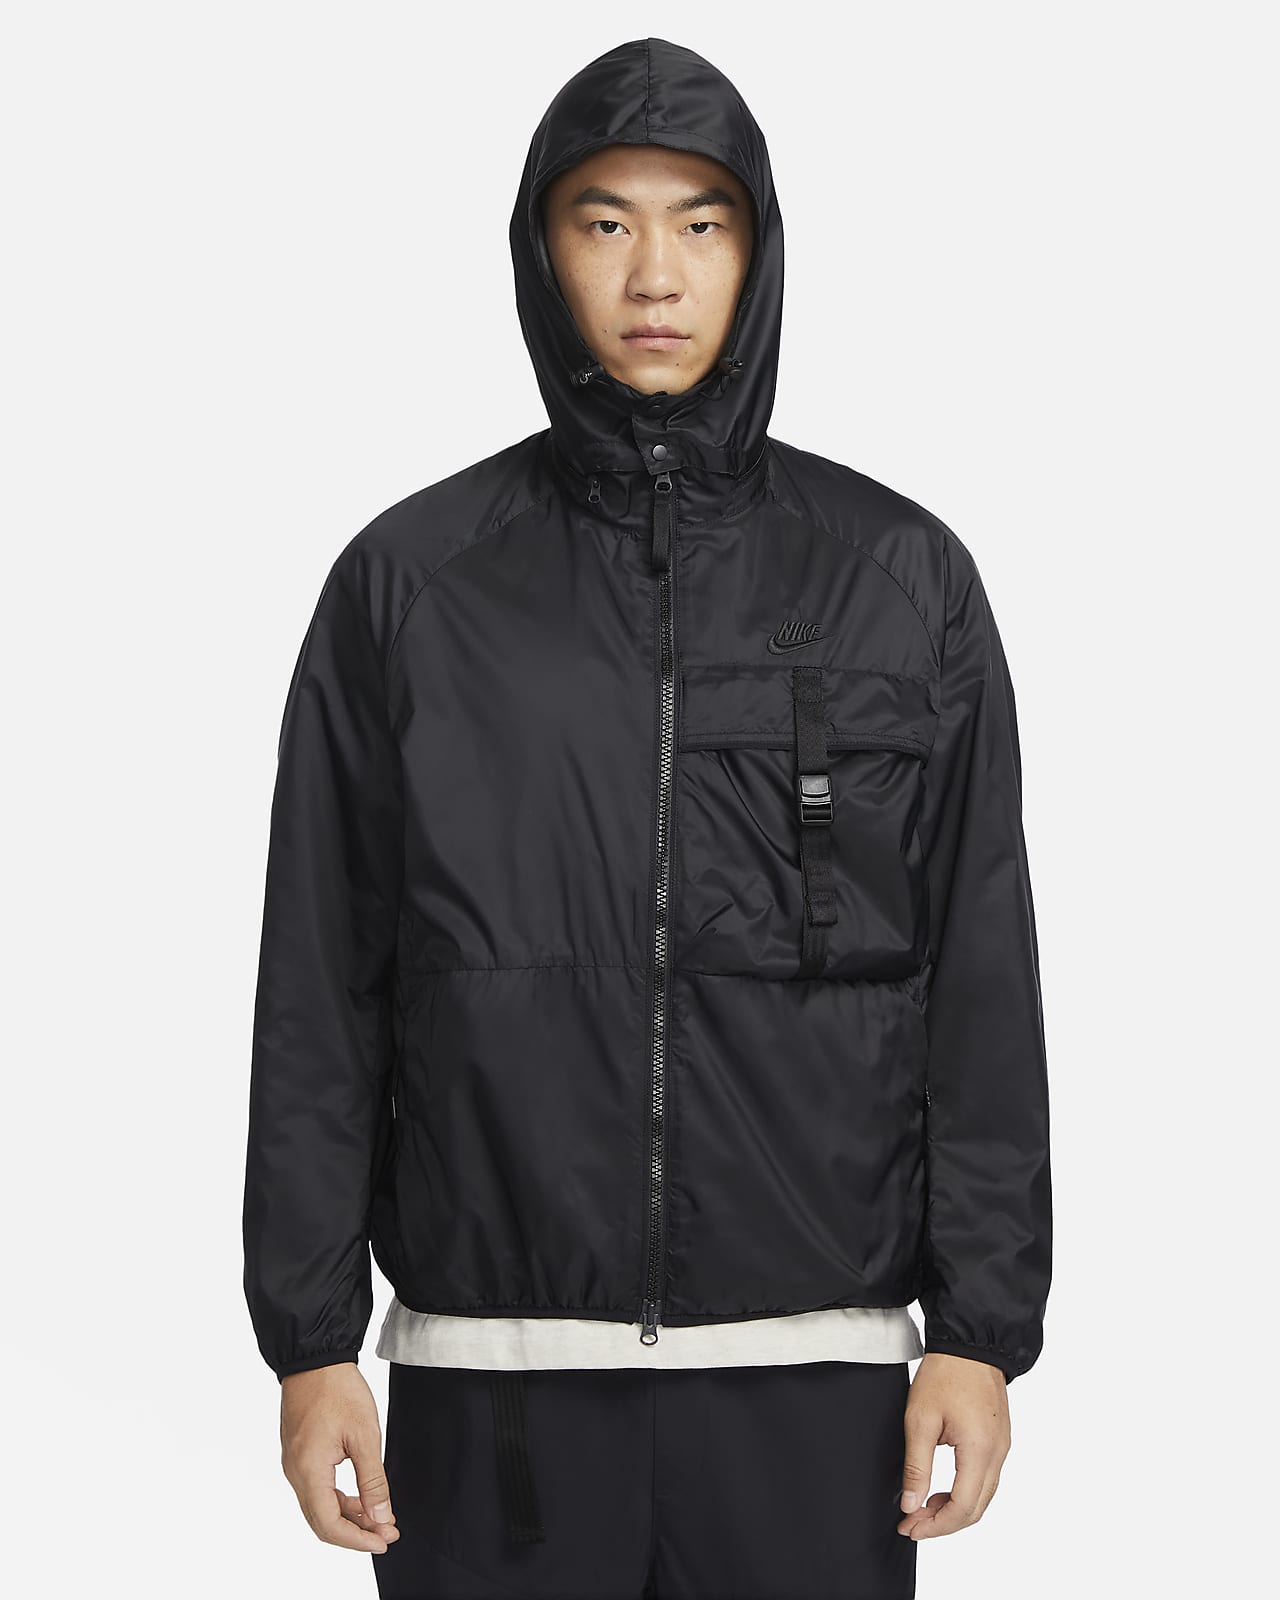 New Nike N24 PACKABLE lined Jacket ($190) and cargo pants ($150